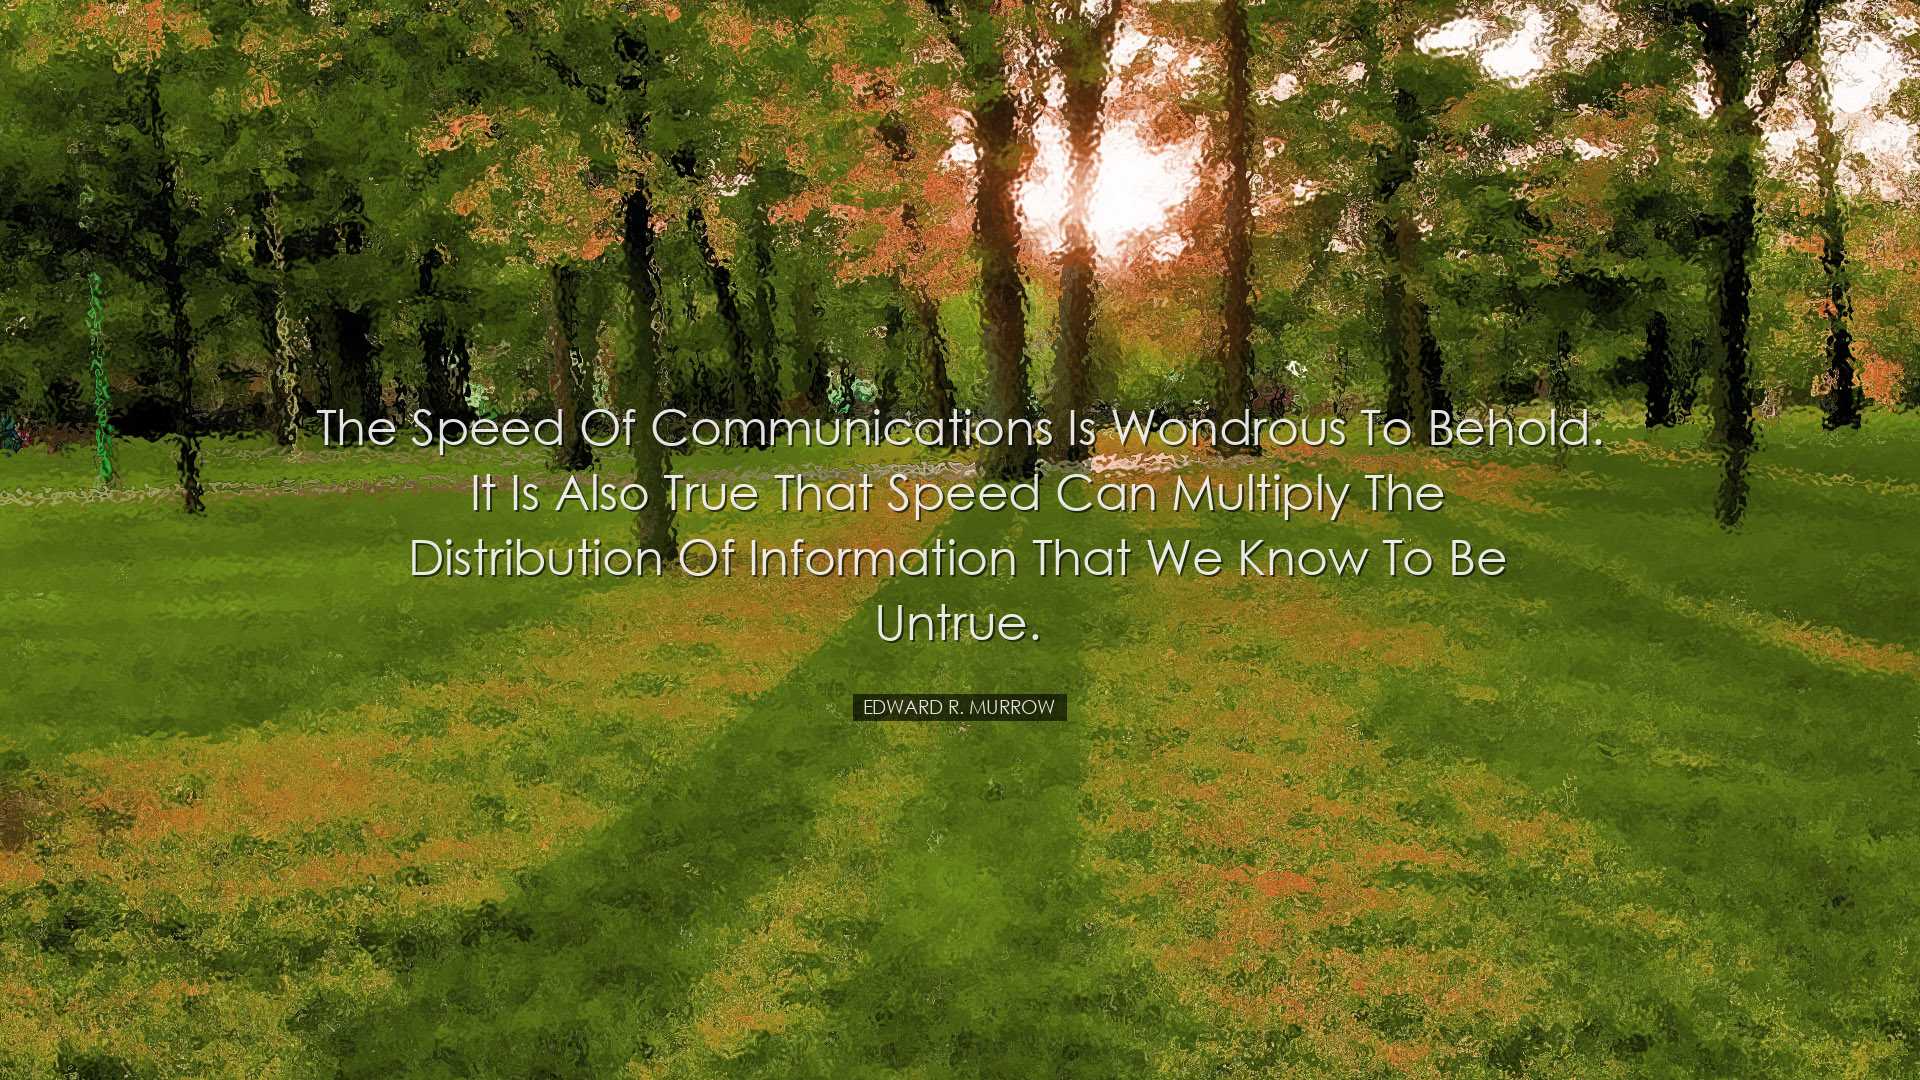 The speed of communications is wondrous to behold. It is also true